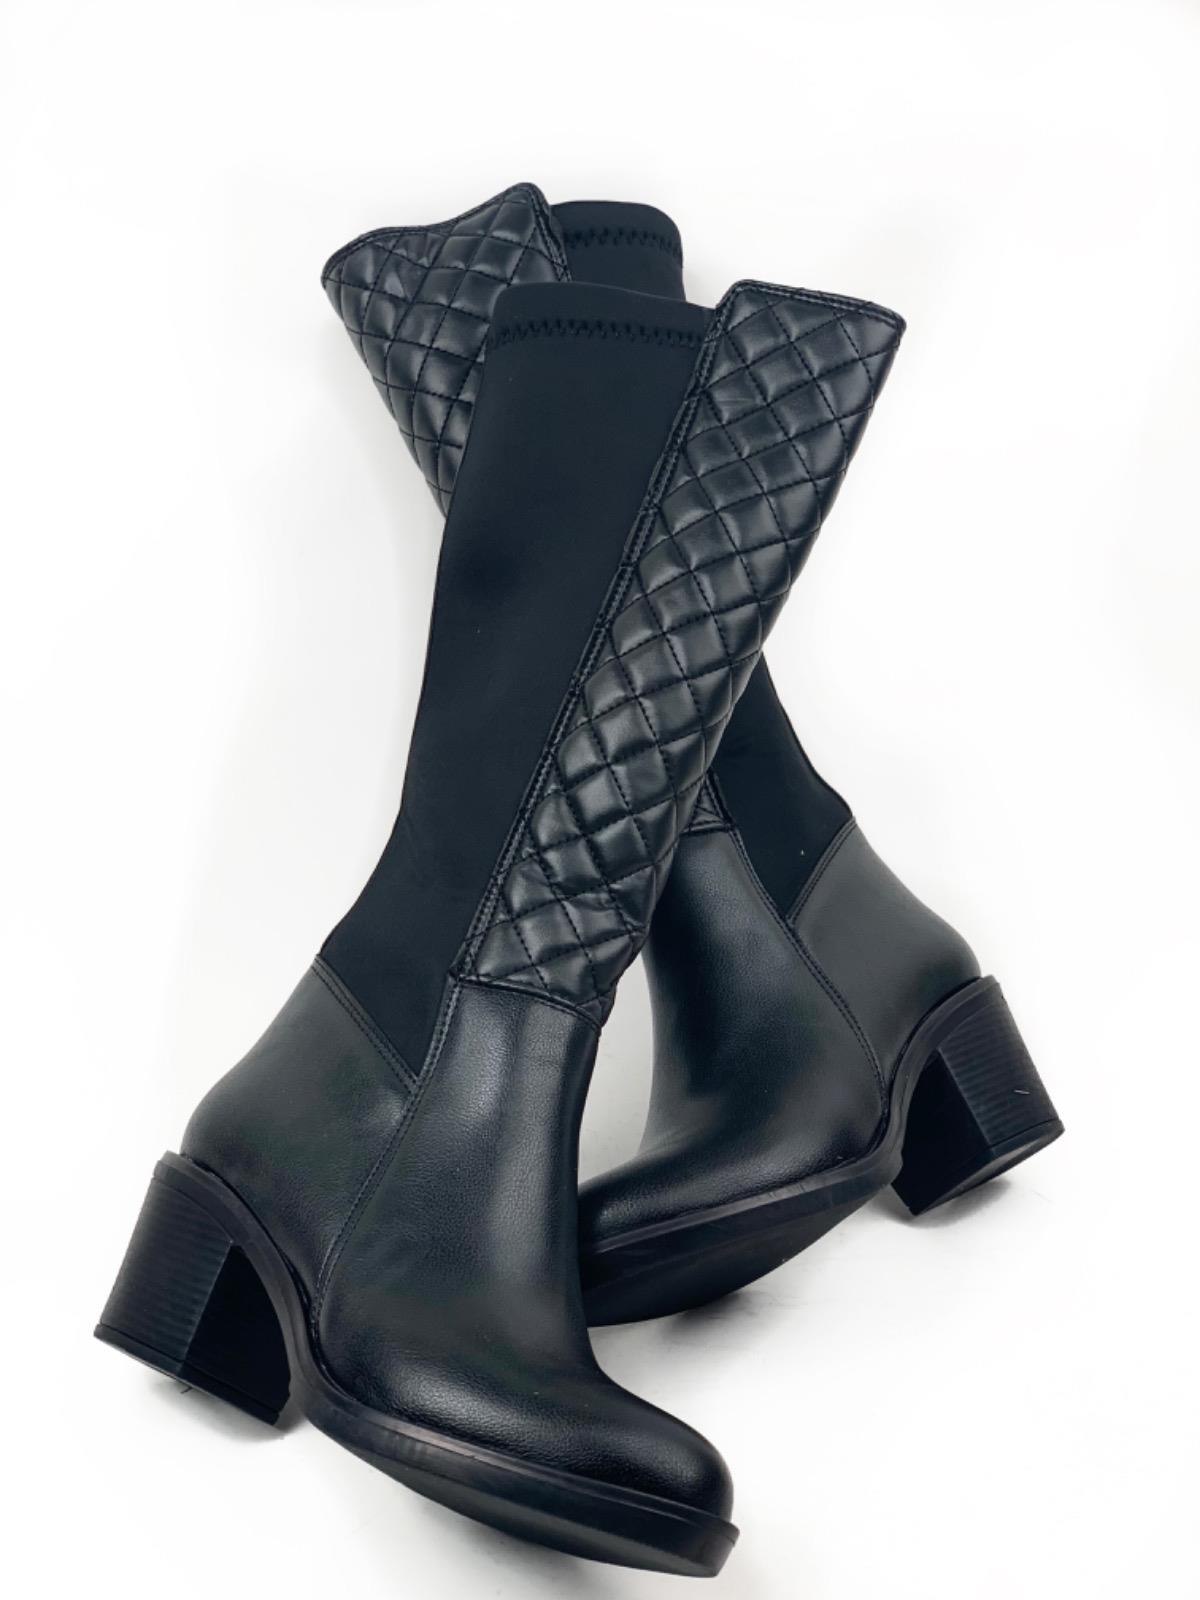 Women's Black Kapitun Patterned Heeled Stretch Boots - STREETMODE ™